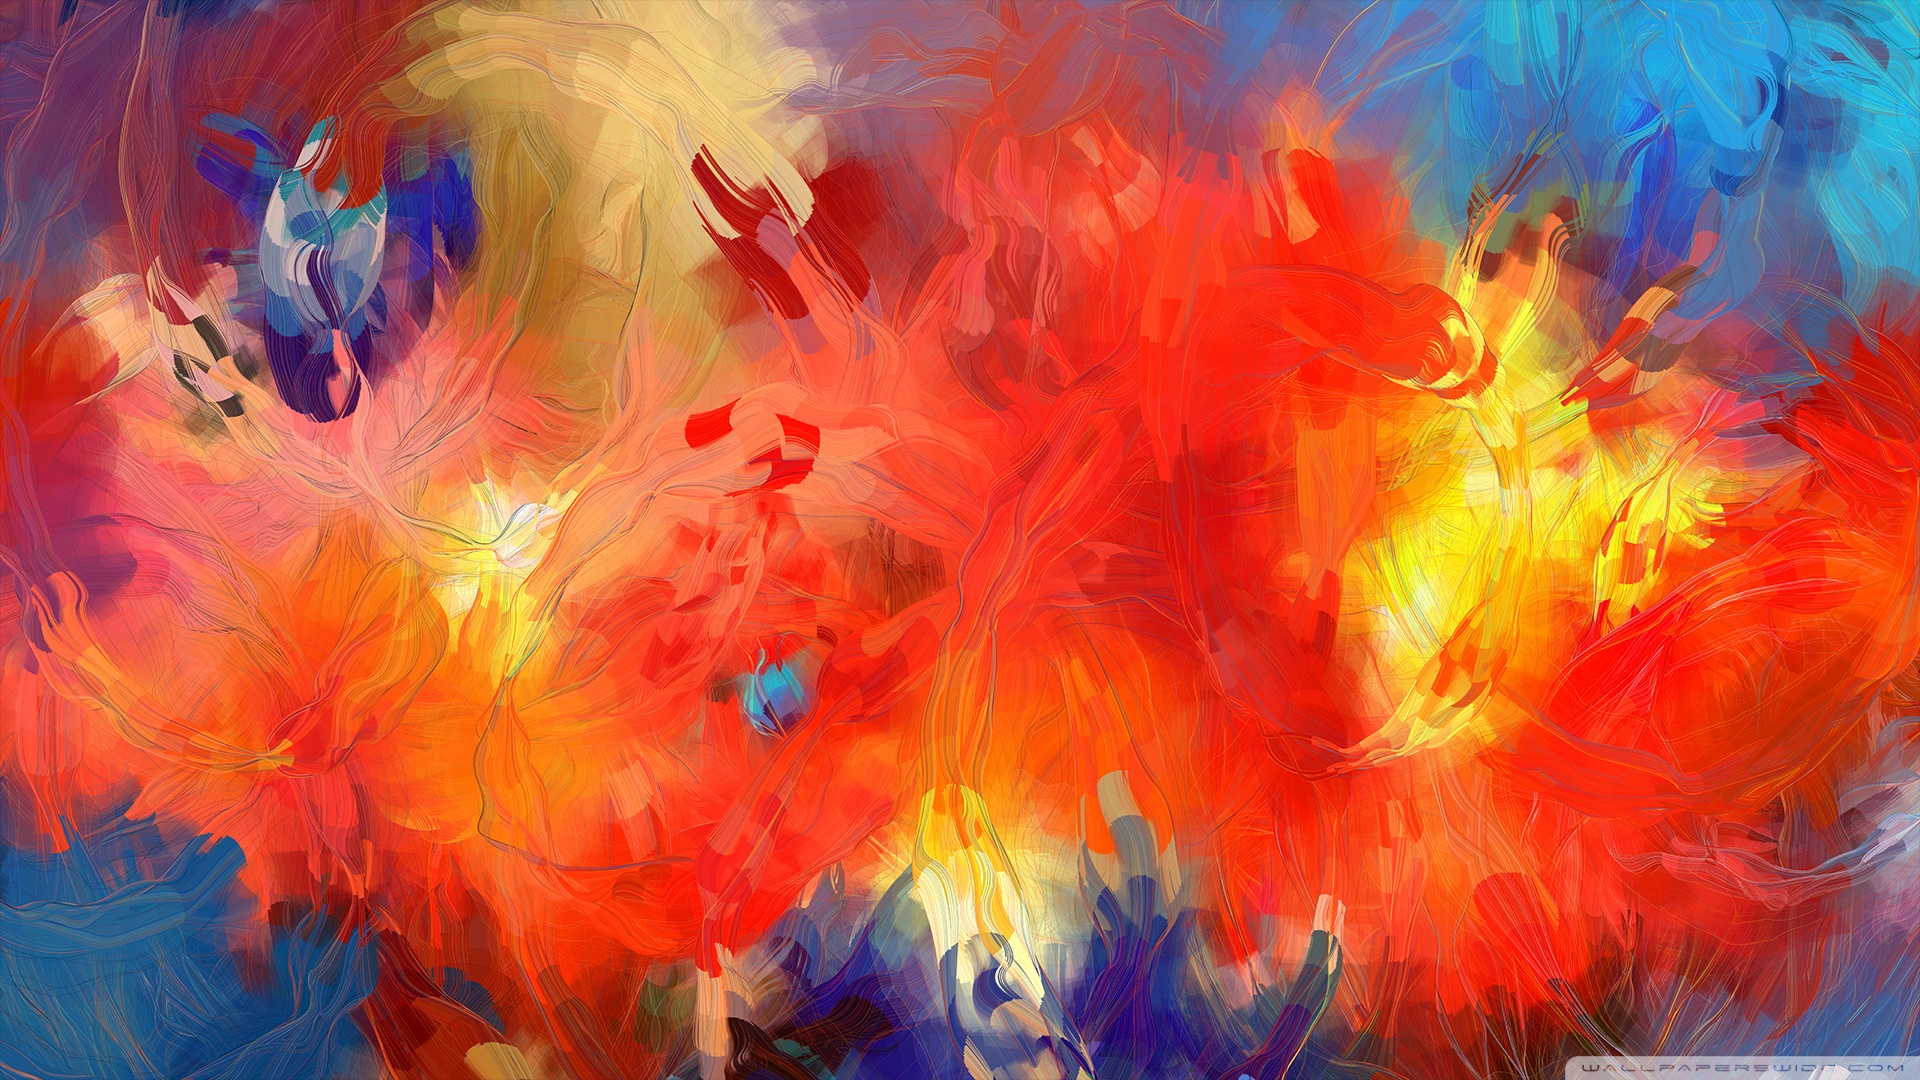 Famous Abstract Art Paintings Wallpaper Free Desktop | I HD Images